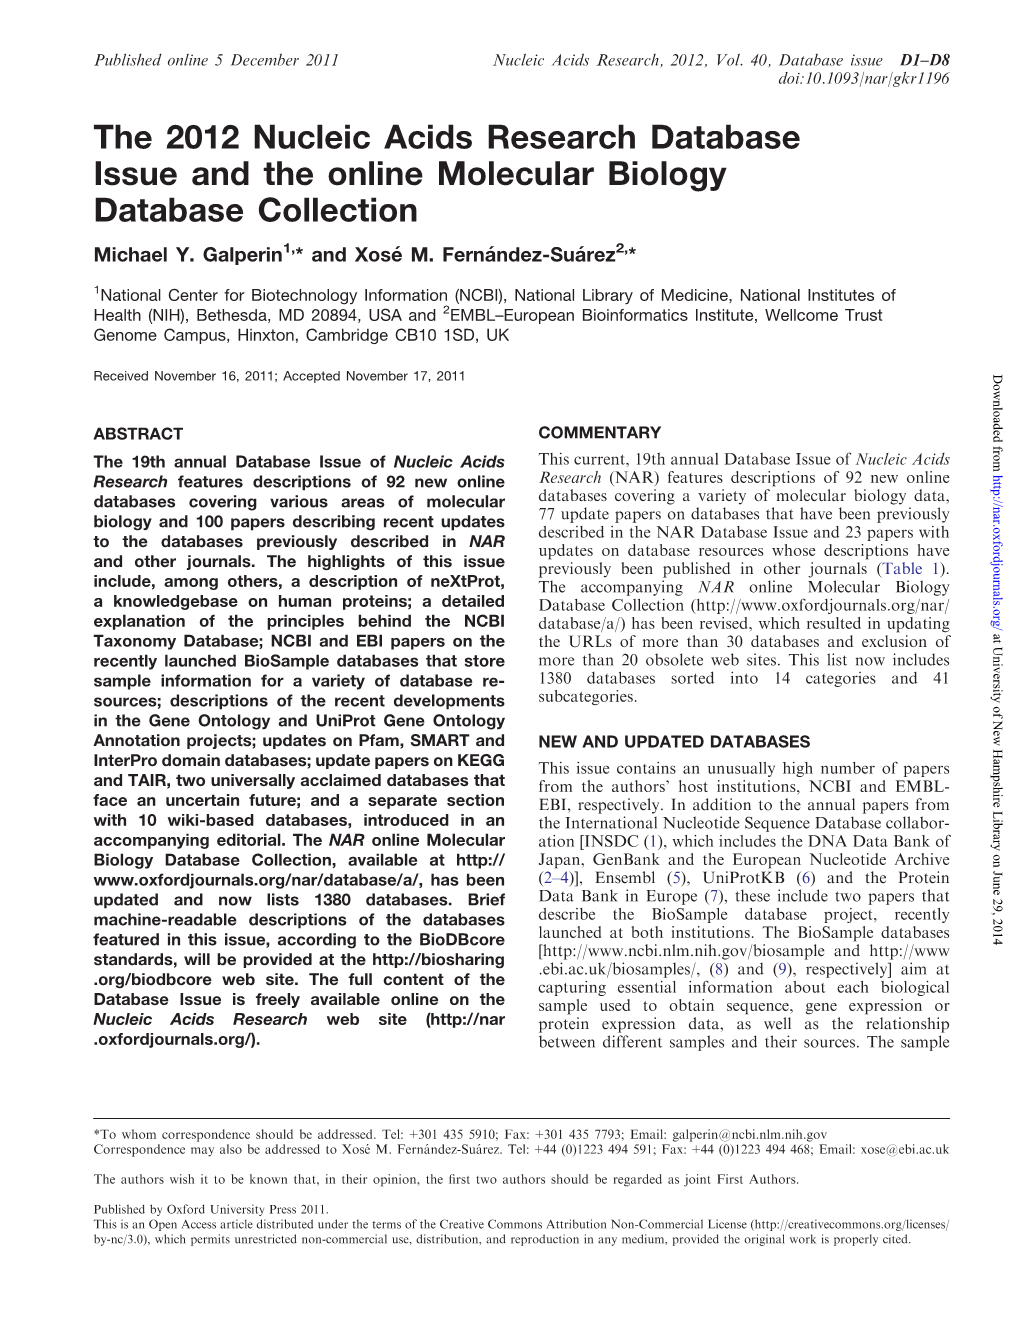 The 2012 Nucleic Acids Research Database Issue and the Online Molecular Biology Database Collection Michael Y